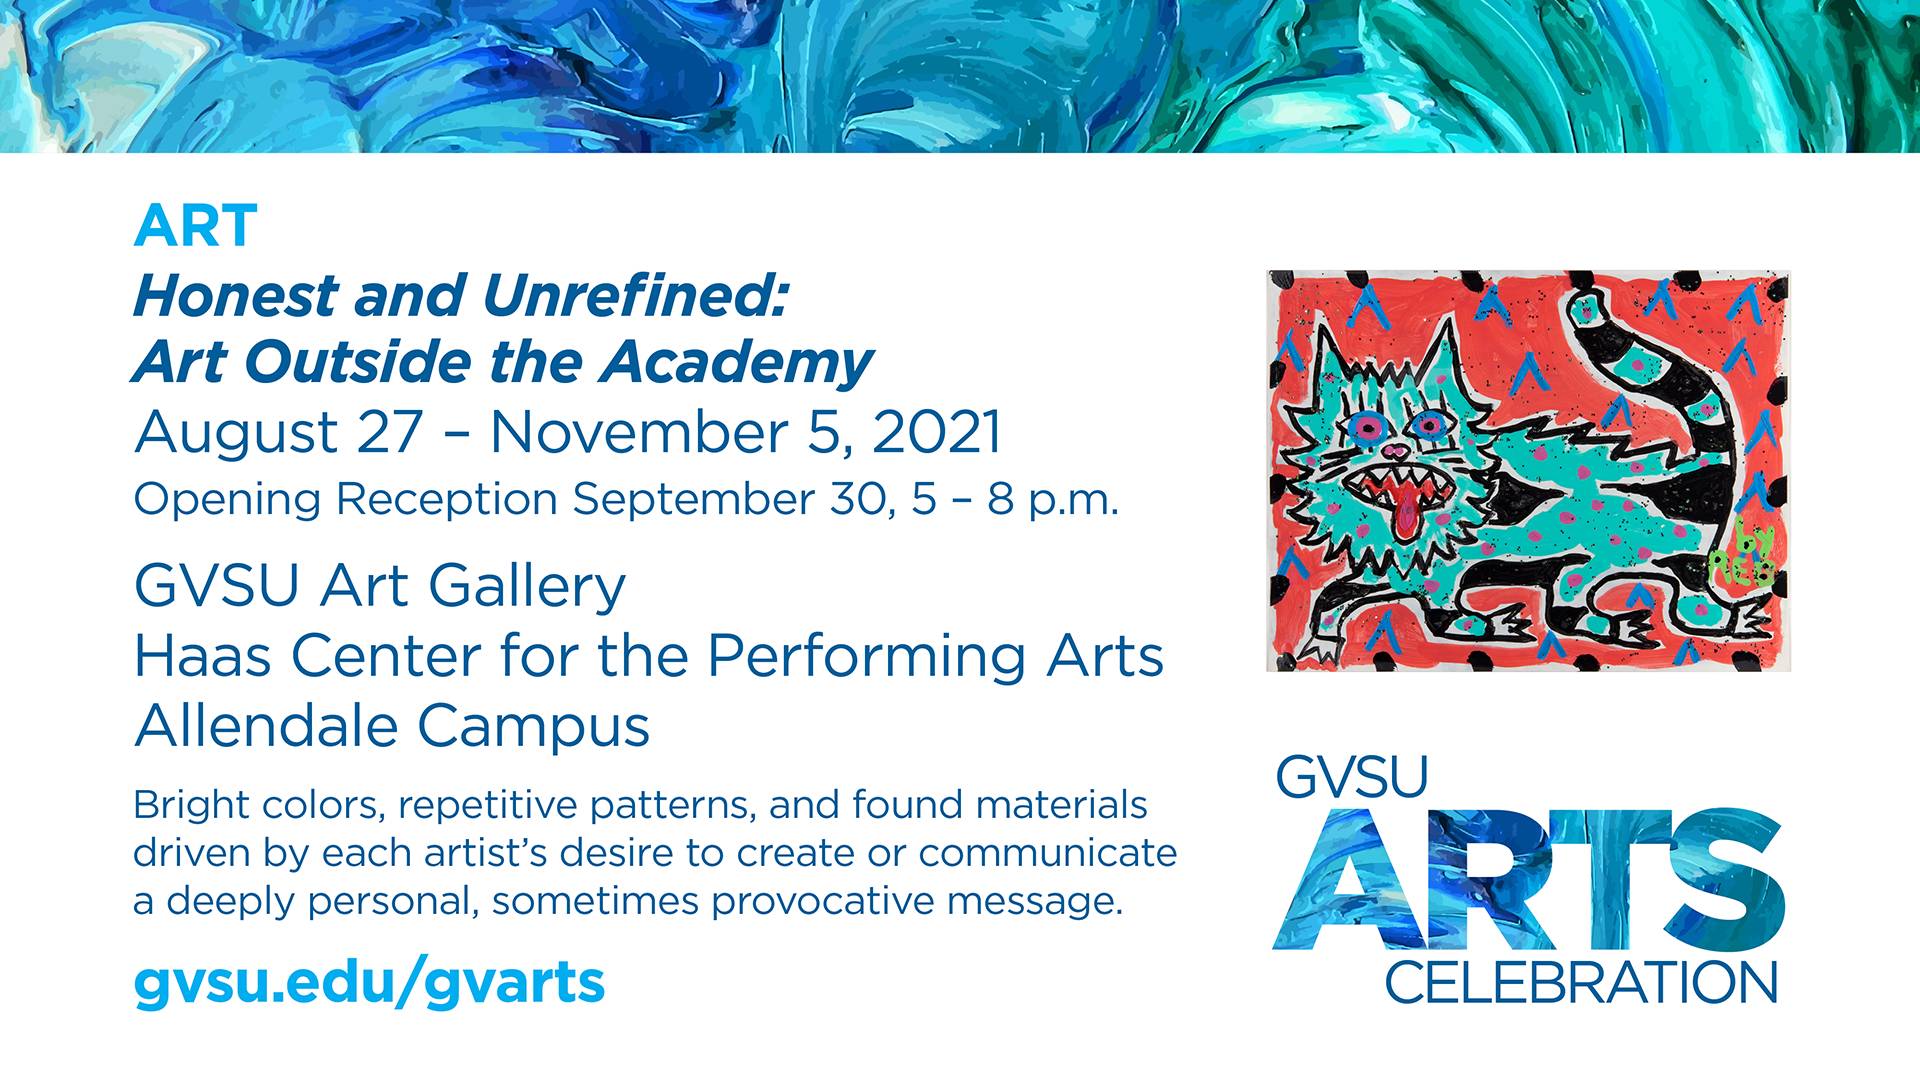 Art Gallery event opens August 27